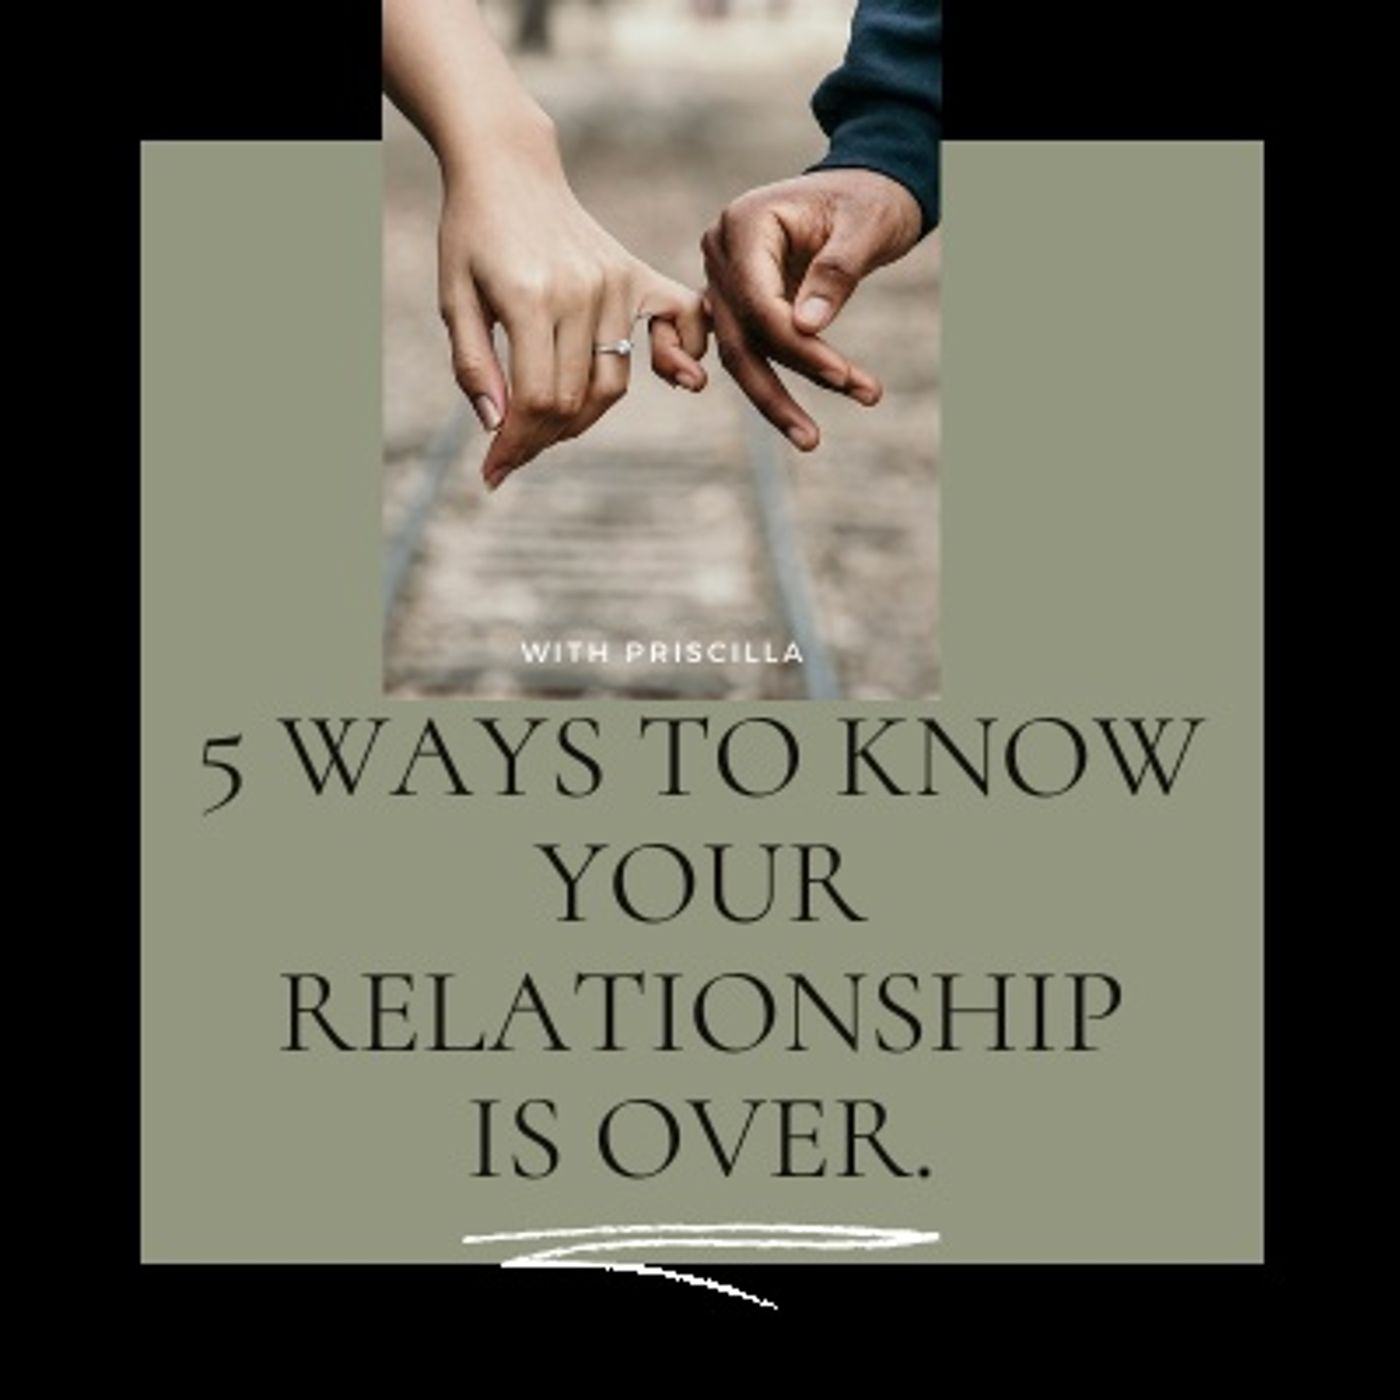 5 WAYS TO KNOW YOUR RELATIONSHIP IS OVER.